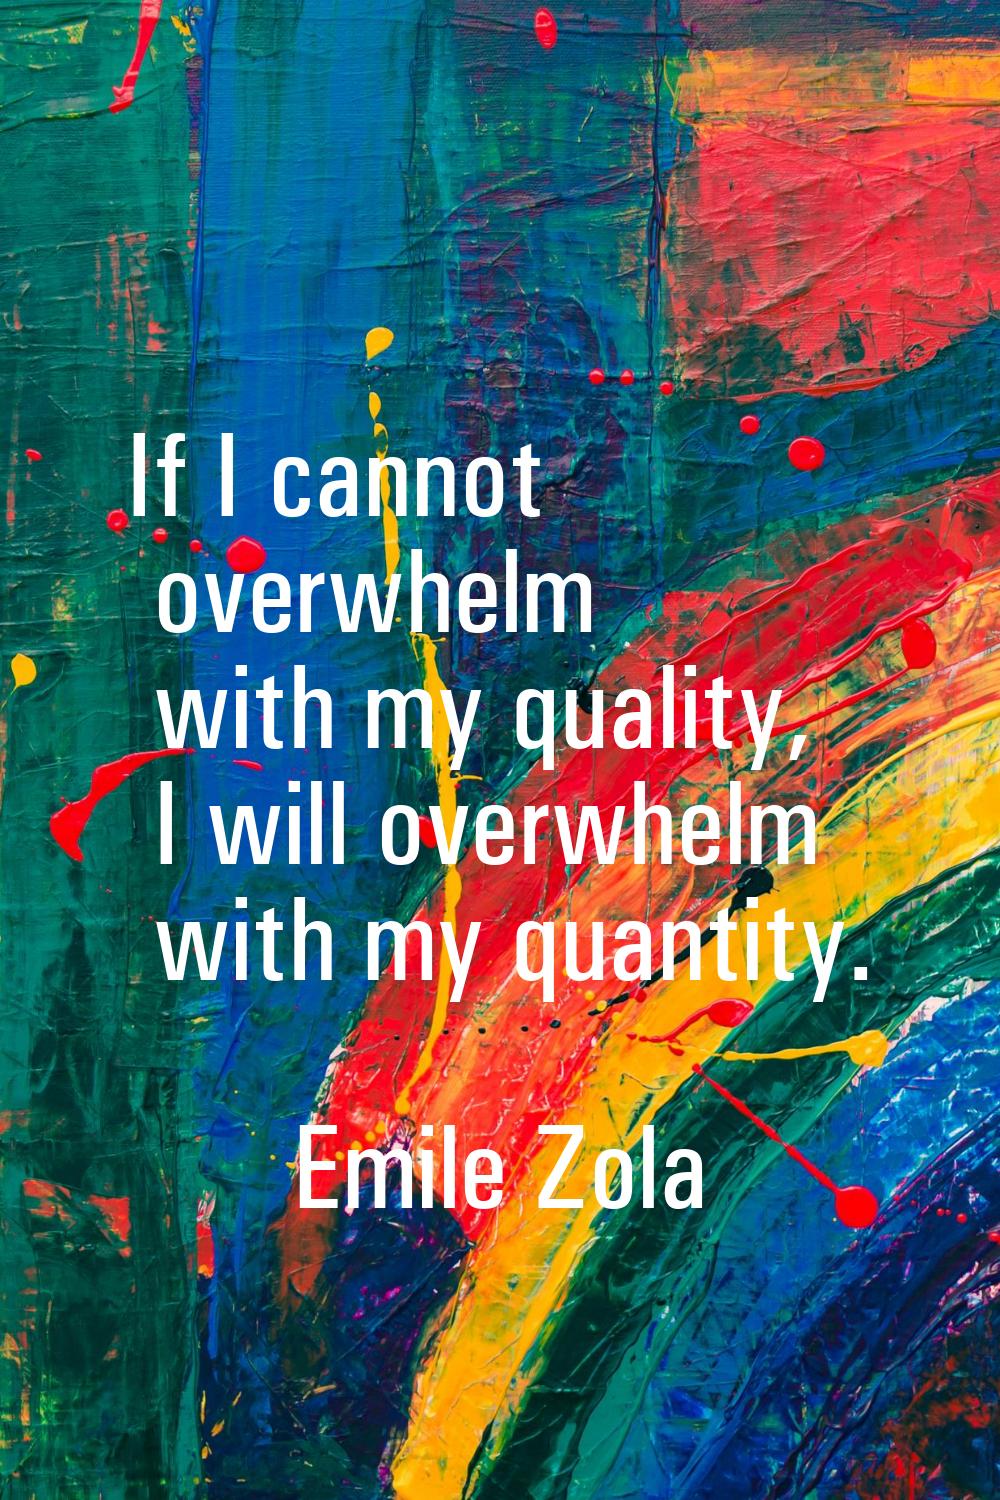 If I cannot overwhelm with my quality, I will overwhelm with my quantity.